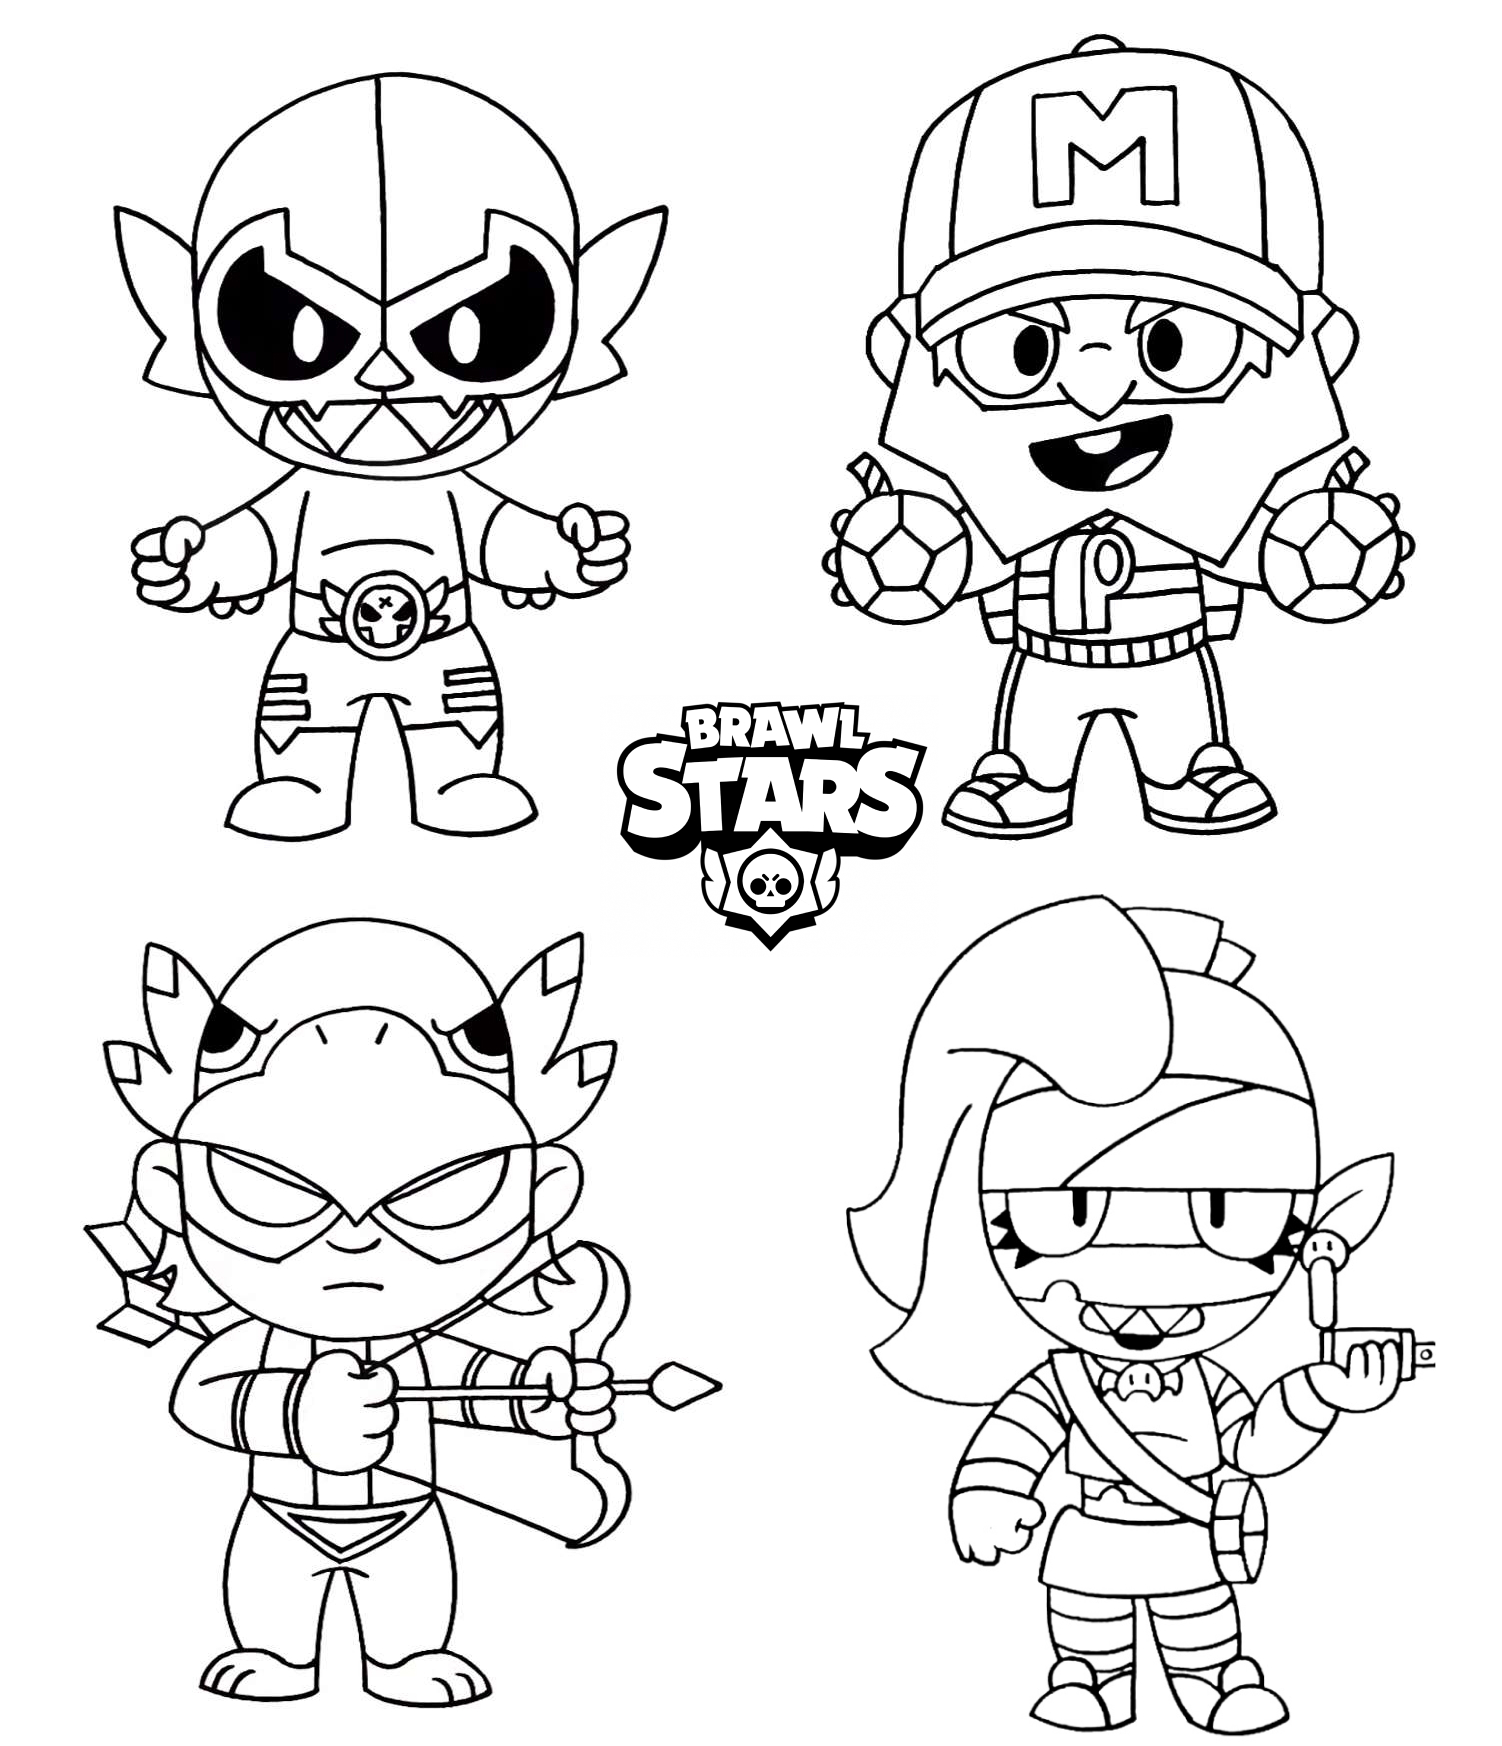 Coloring page Emz Brawl Stars and other fighters